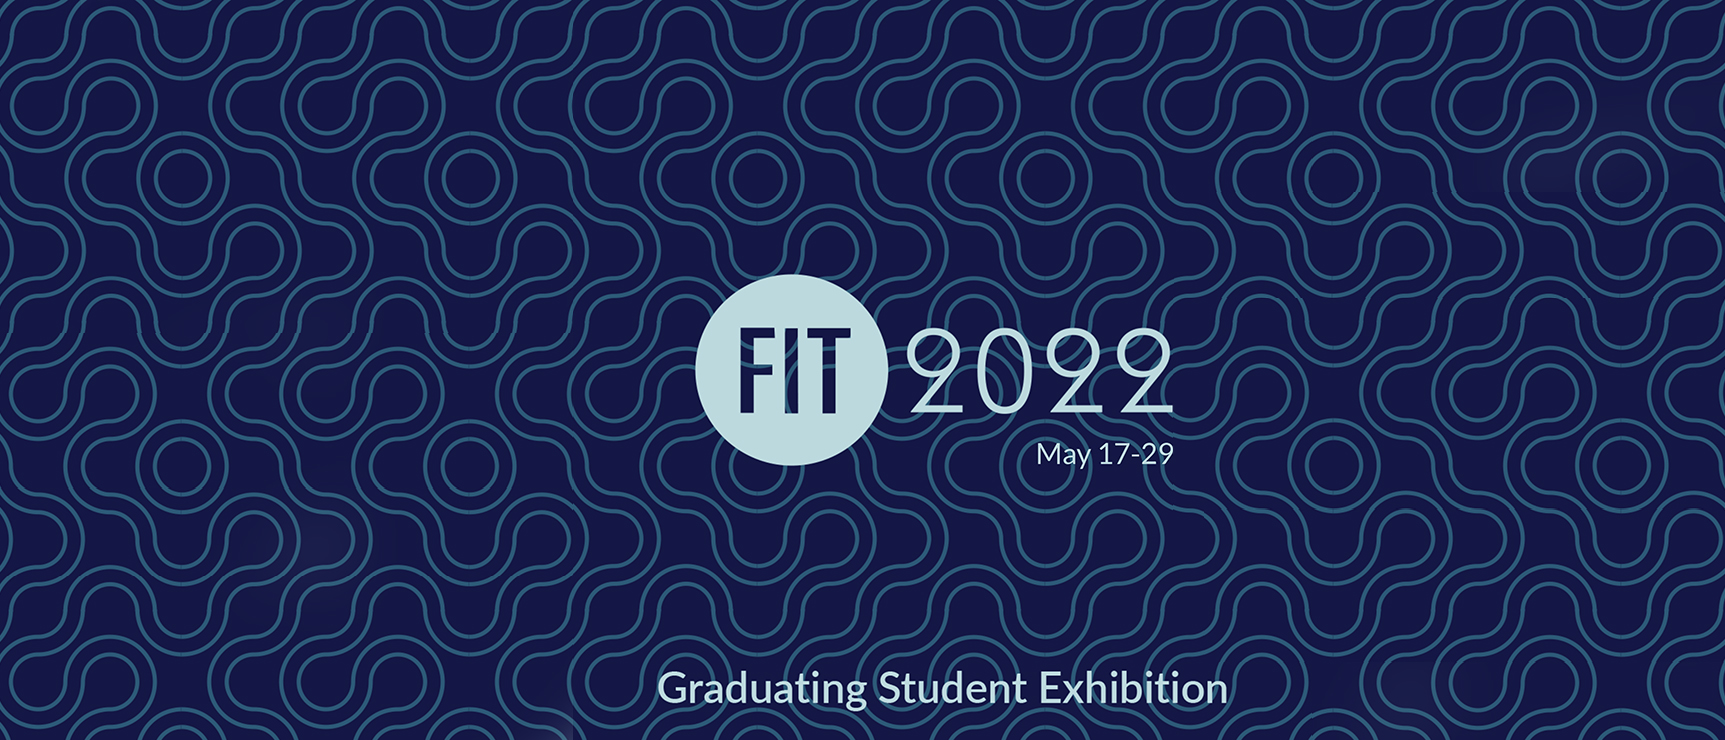 fit 2022 may 17 - 29, 2022 graduating student exhiibition